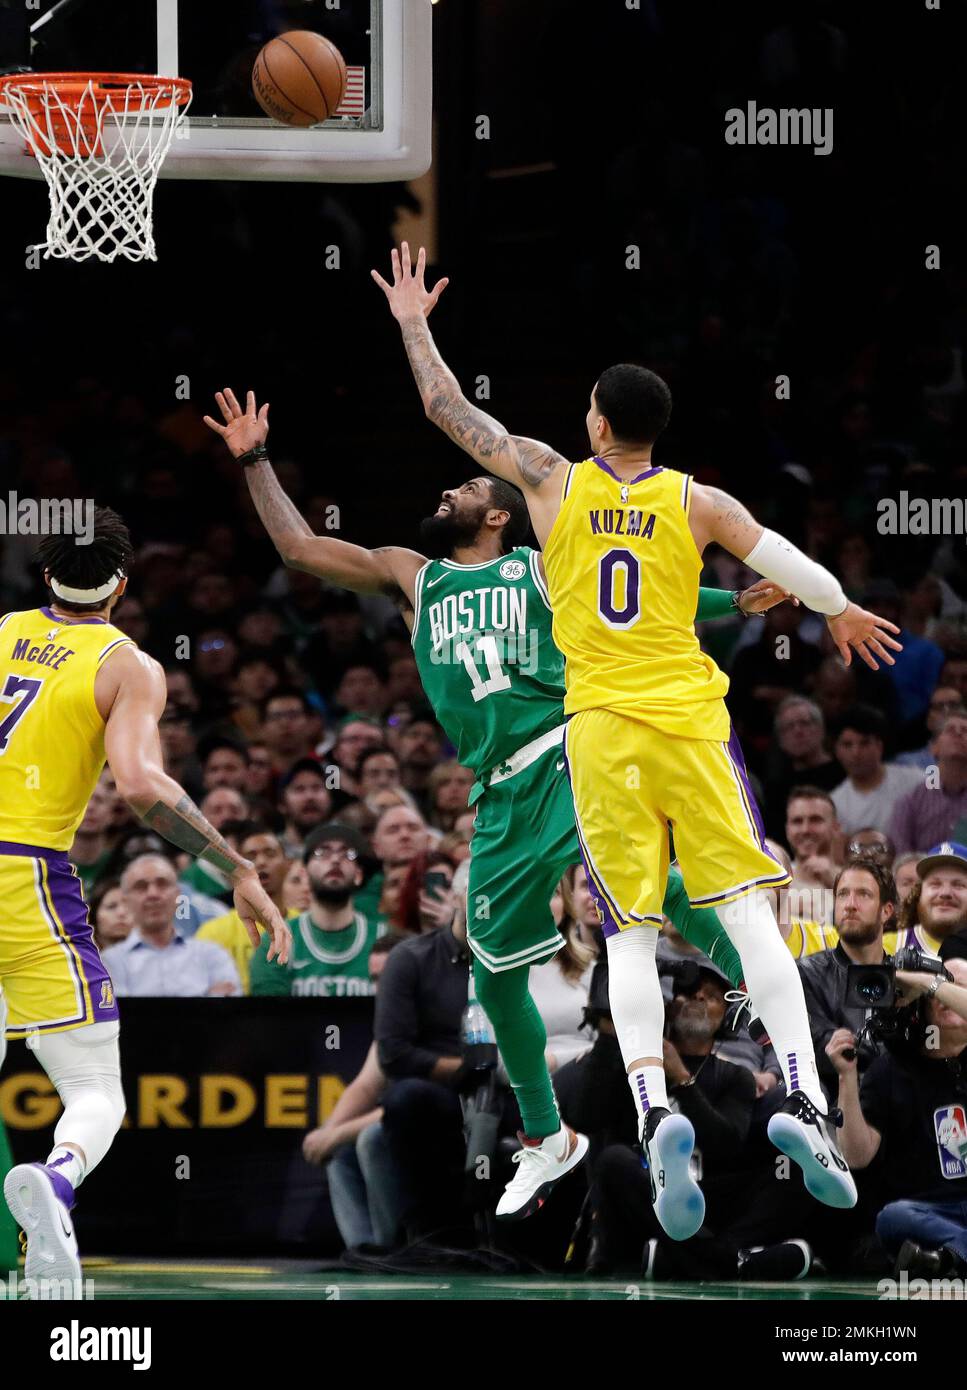 In this Feb. 7, 2019, photo, Los Angeles Lakers forward Kyle Kuzma (0)  defends against Boston Celtics guard Kyrie Irving (11) during an NBA  basketball game in Boston. Kuzma is wearing Nike's